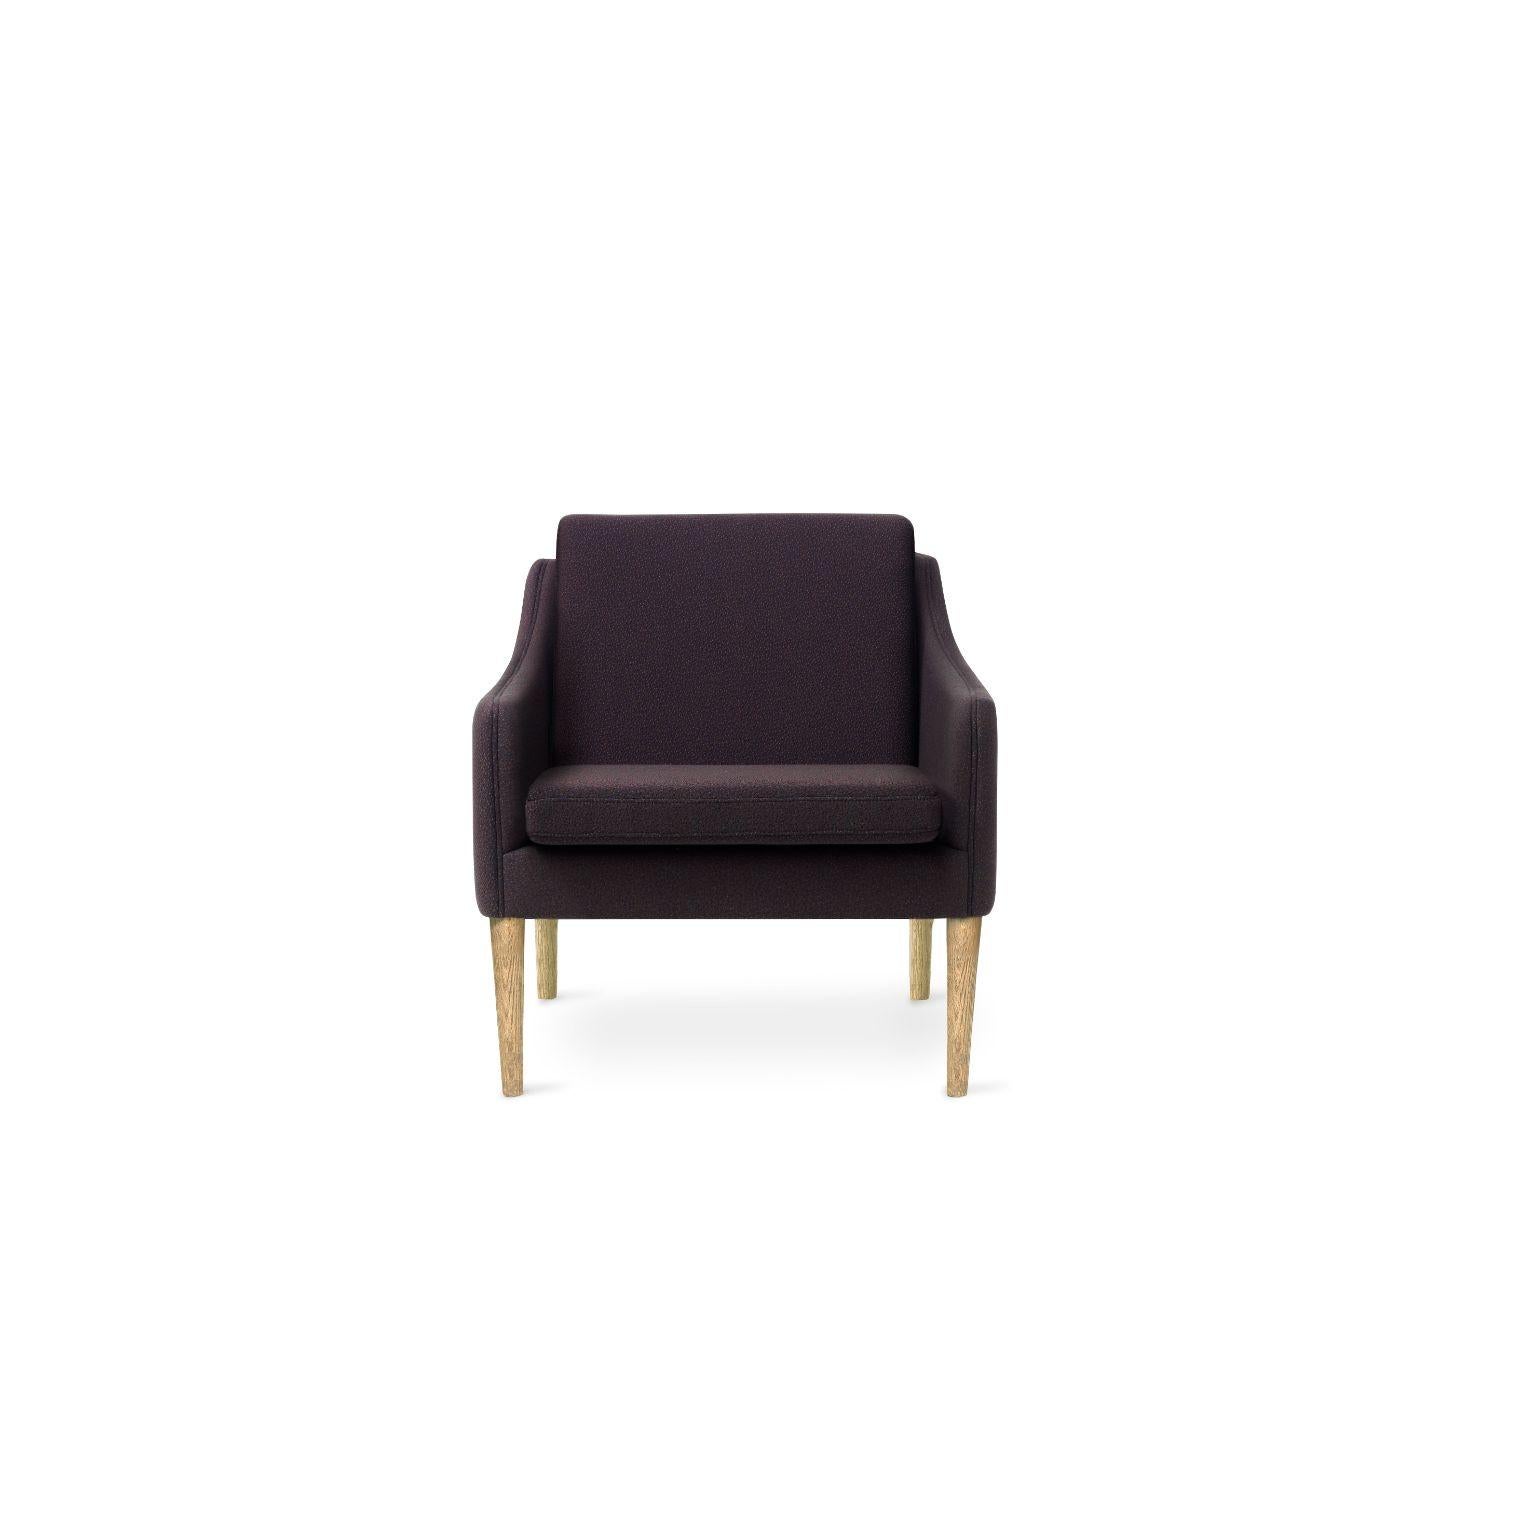 Mr. Olsen lounge chair sprinkles solid smoked oak eggplant by Warm Nordic
Dimensions: D 81 x W 79 x H 78 cm
Material: Textile upholstery, foam, spring system, oak
Weight: 27 kg
Also available in different colours, materials and finishes.

A